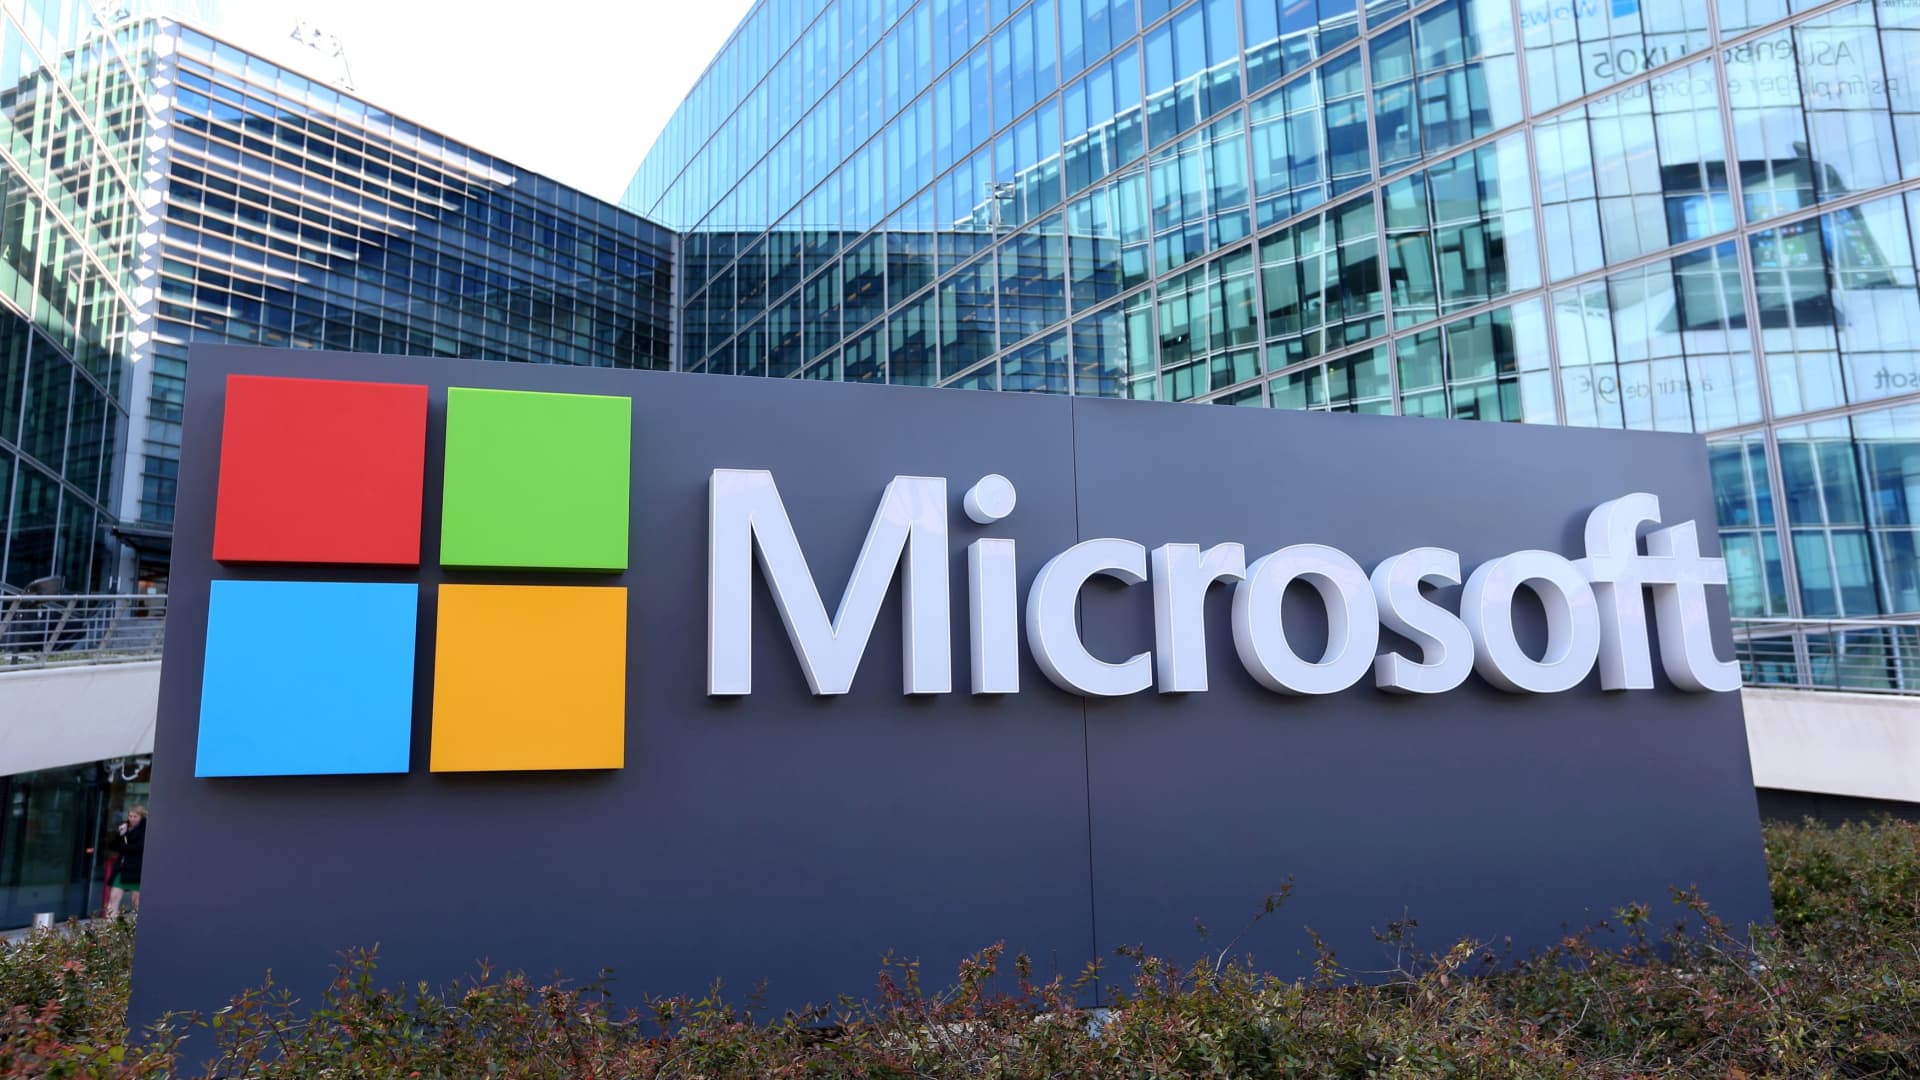 Stocks making the biggest moves midday: Microsoft, Chewy, GameStop, MongoDB & more